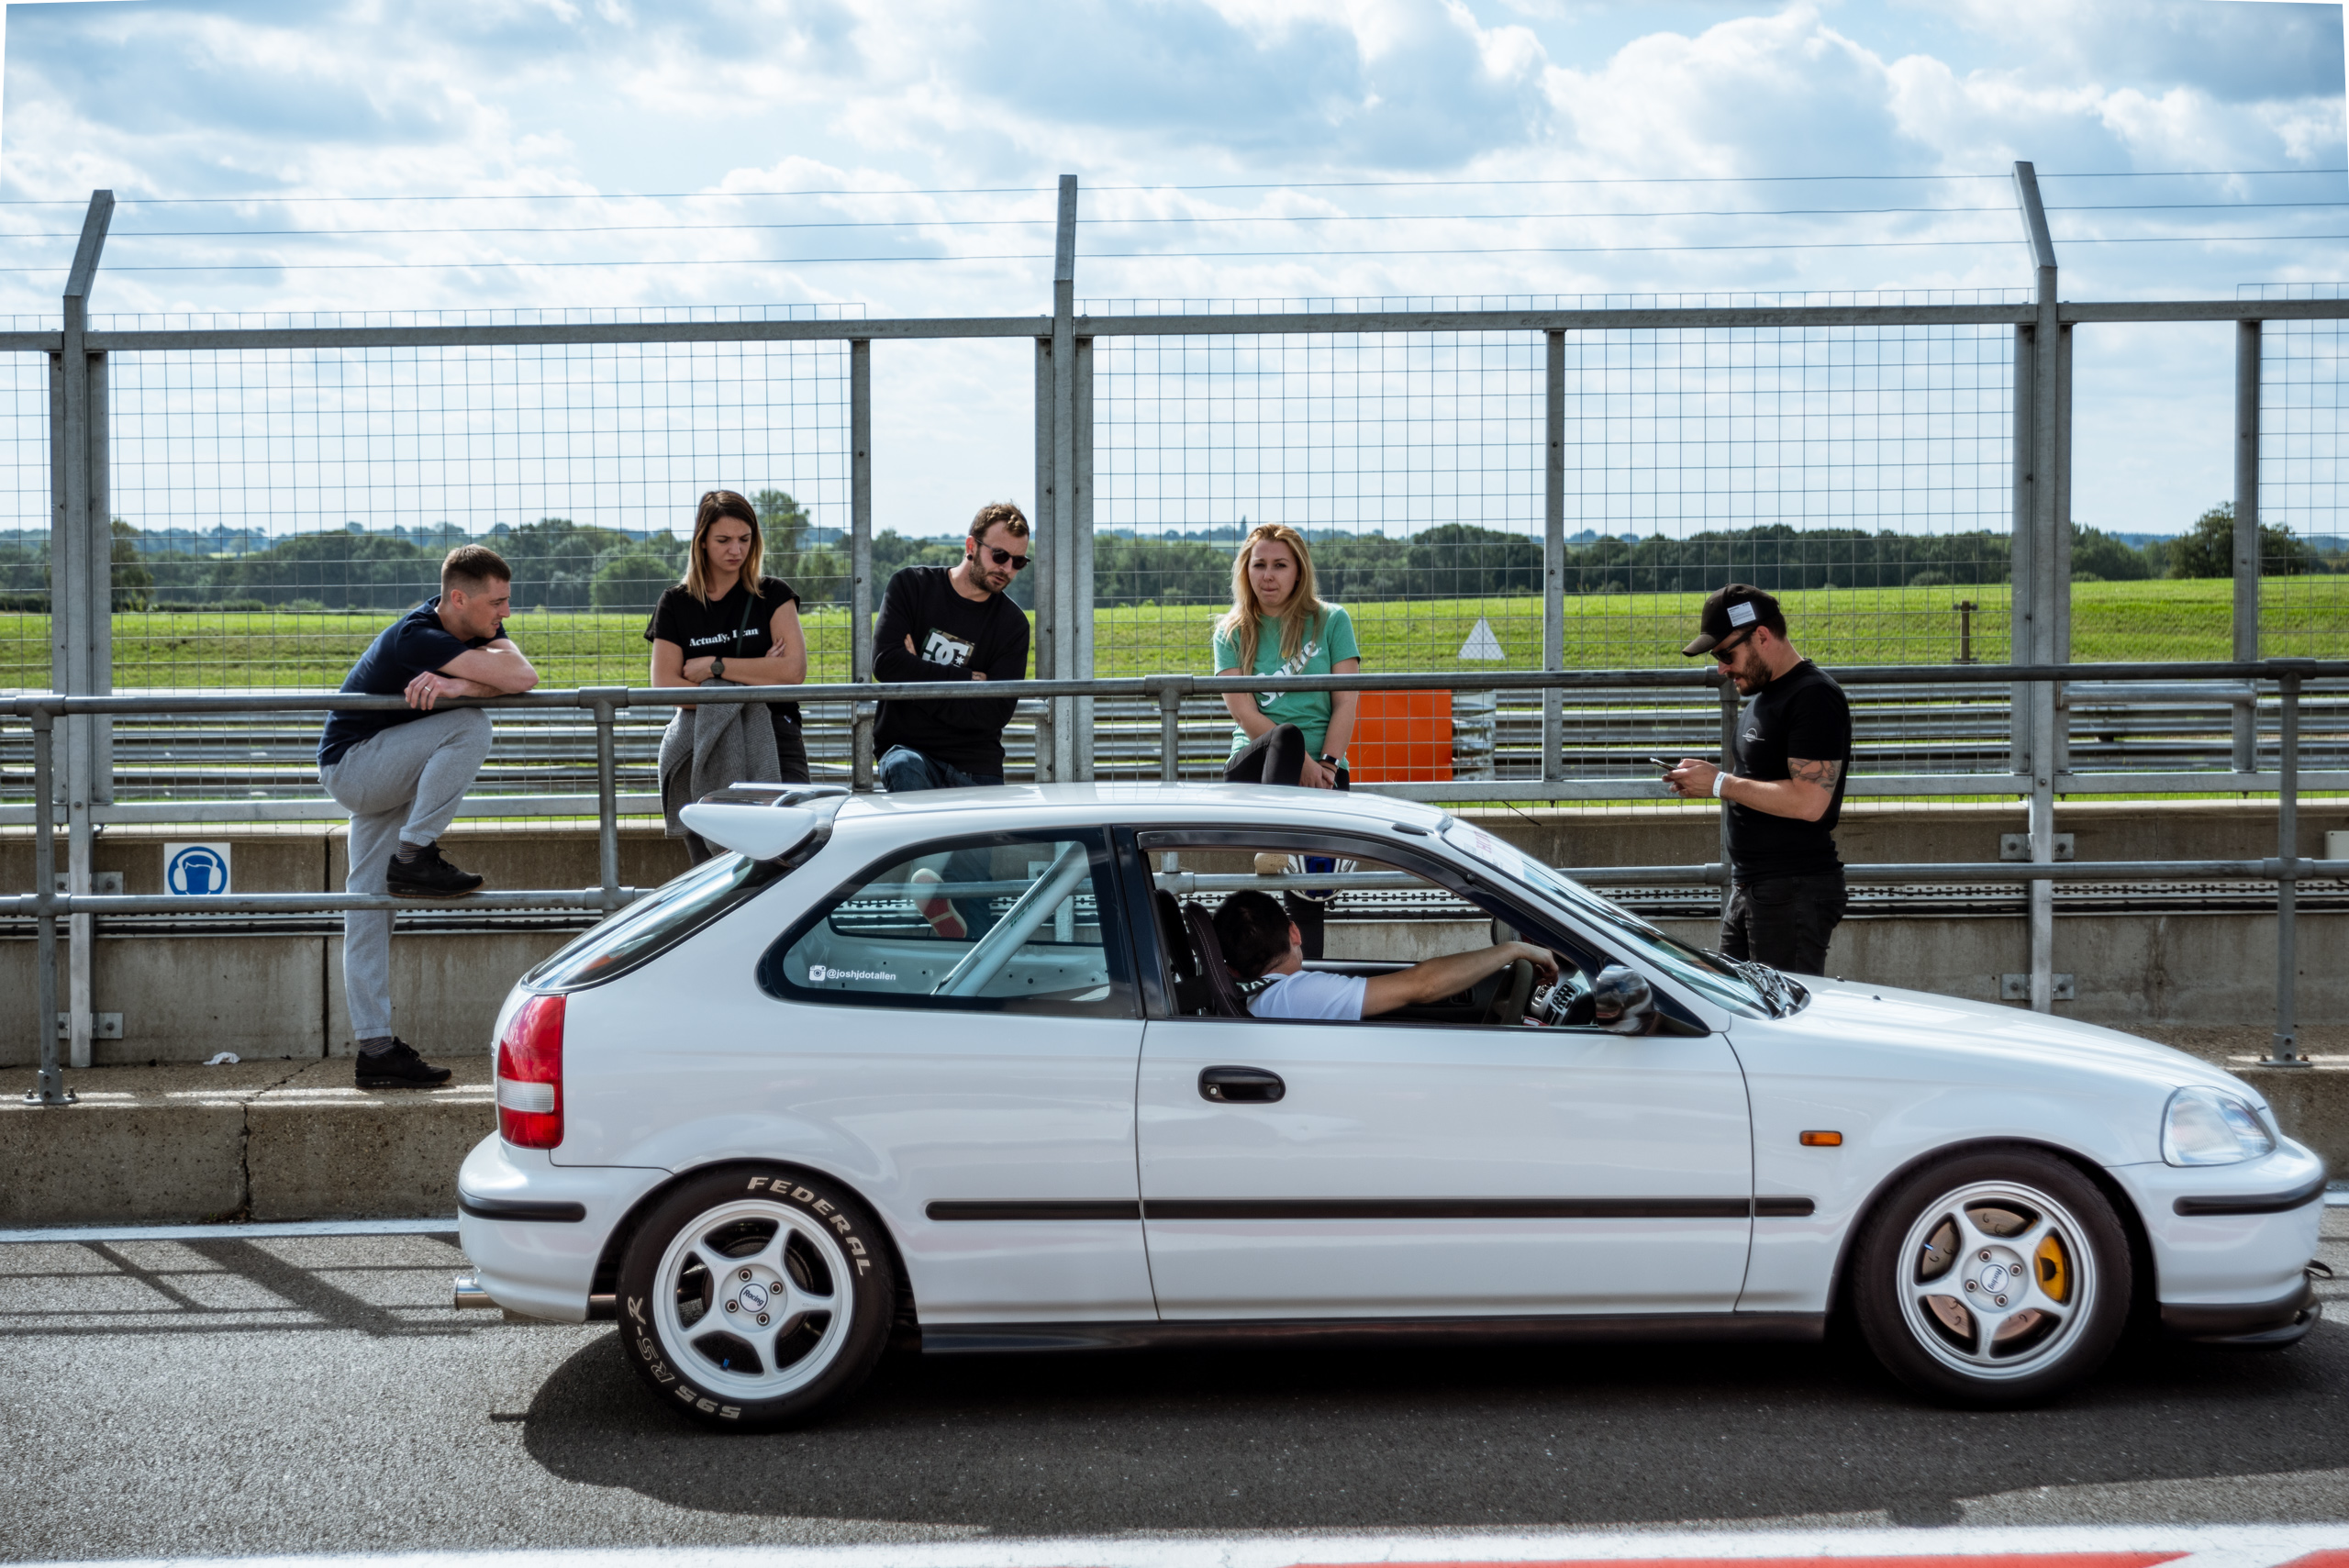 CL7 Accord Euro R (Very pic heavy) - Page 10 - Readers' Cars - PistonHeads